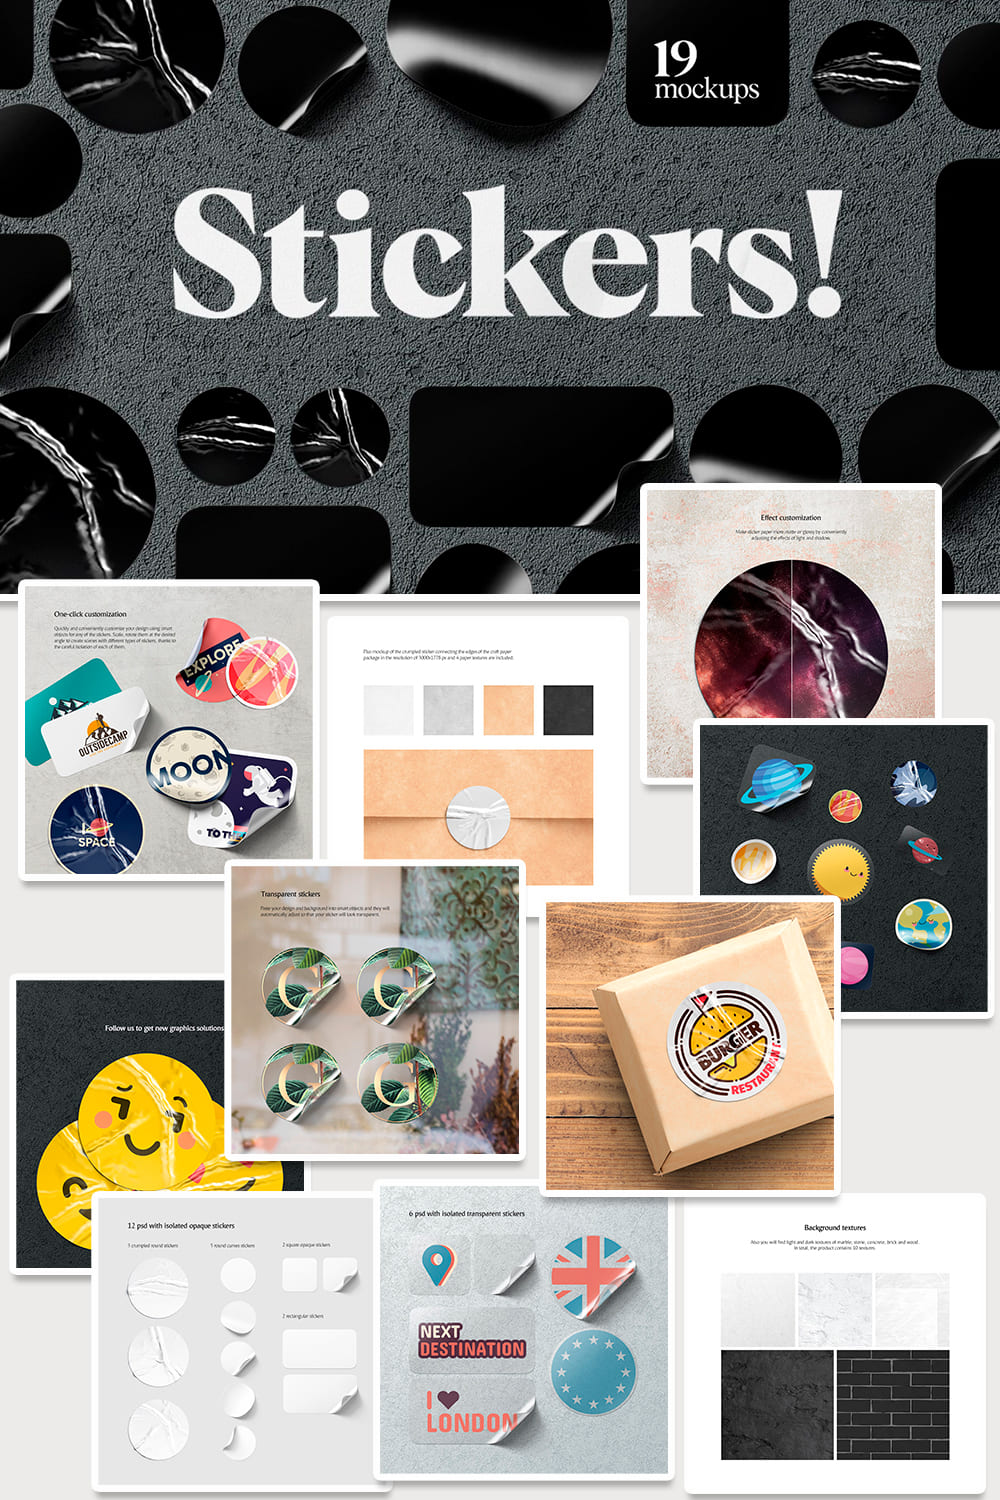 Collection of images of colorful stickers.